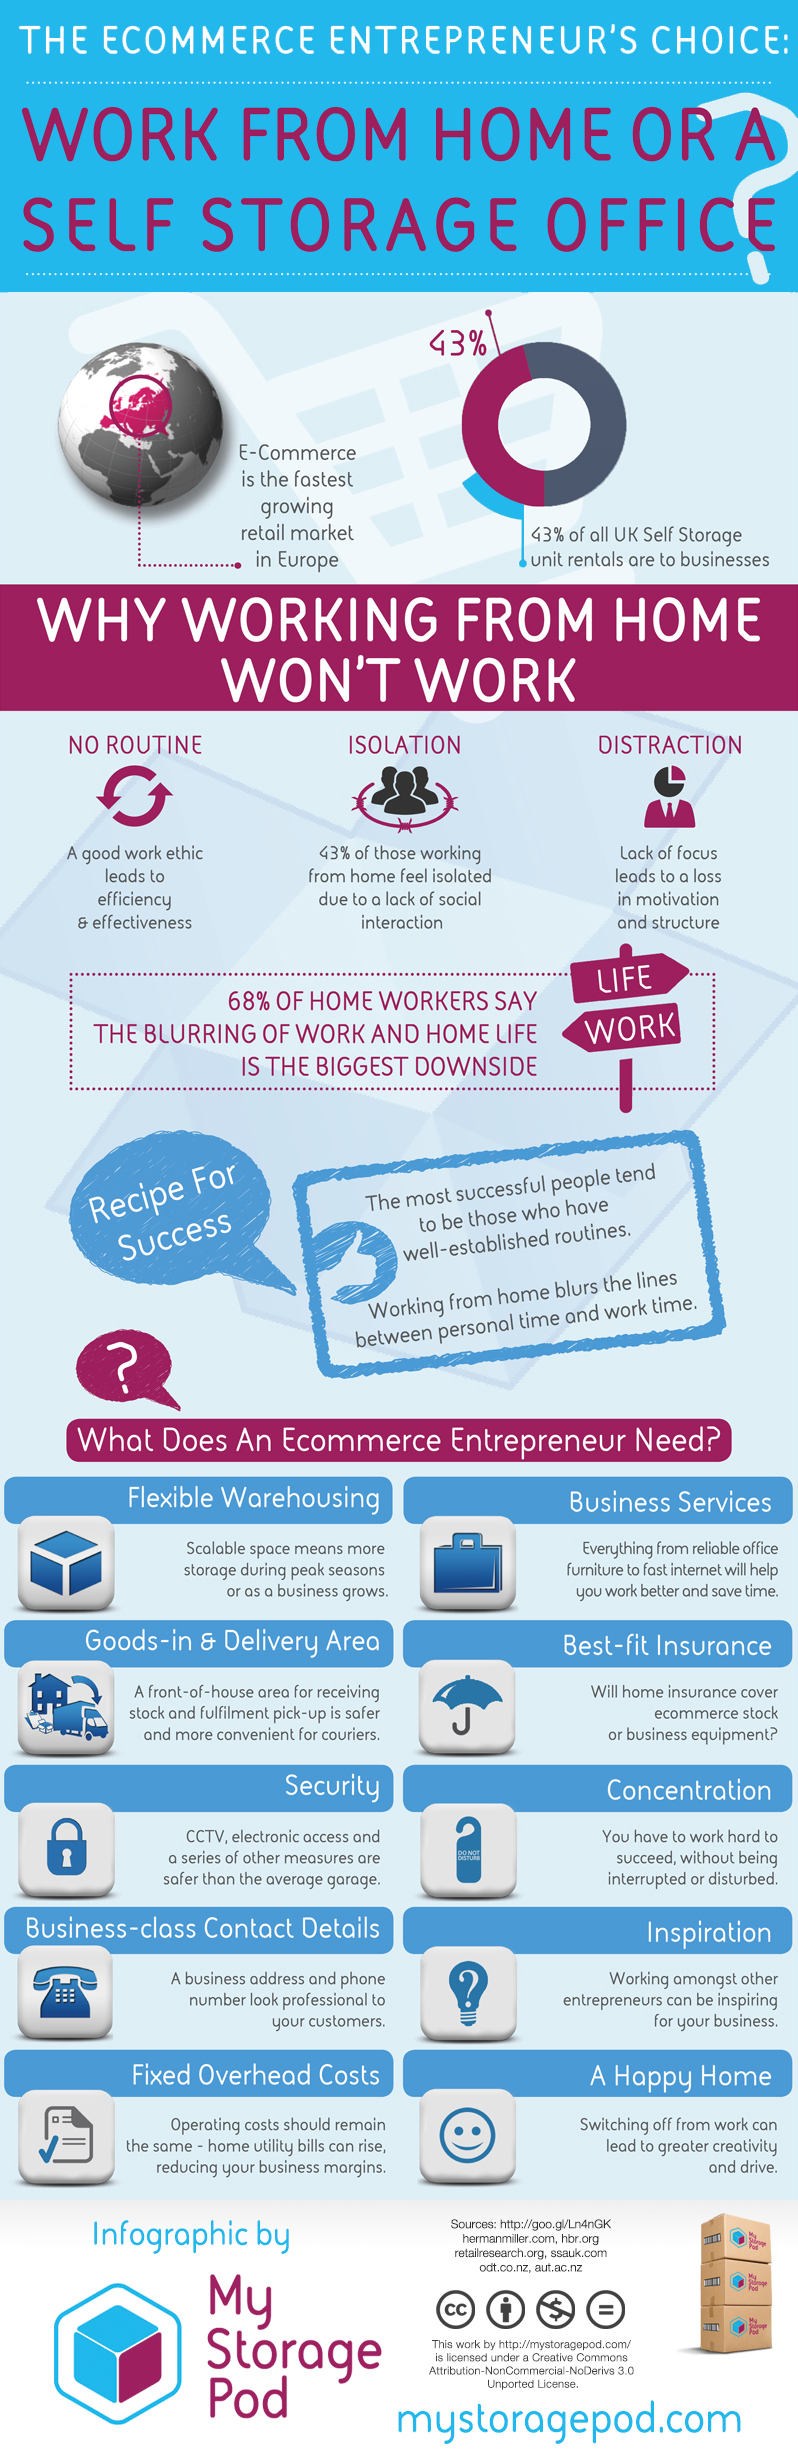 The Ecommerce Entrepreneur's Choice: Work from home or a self storage office?